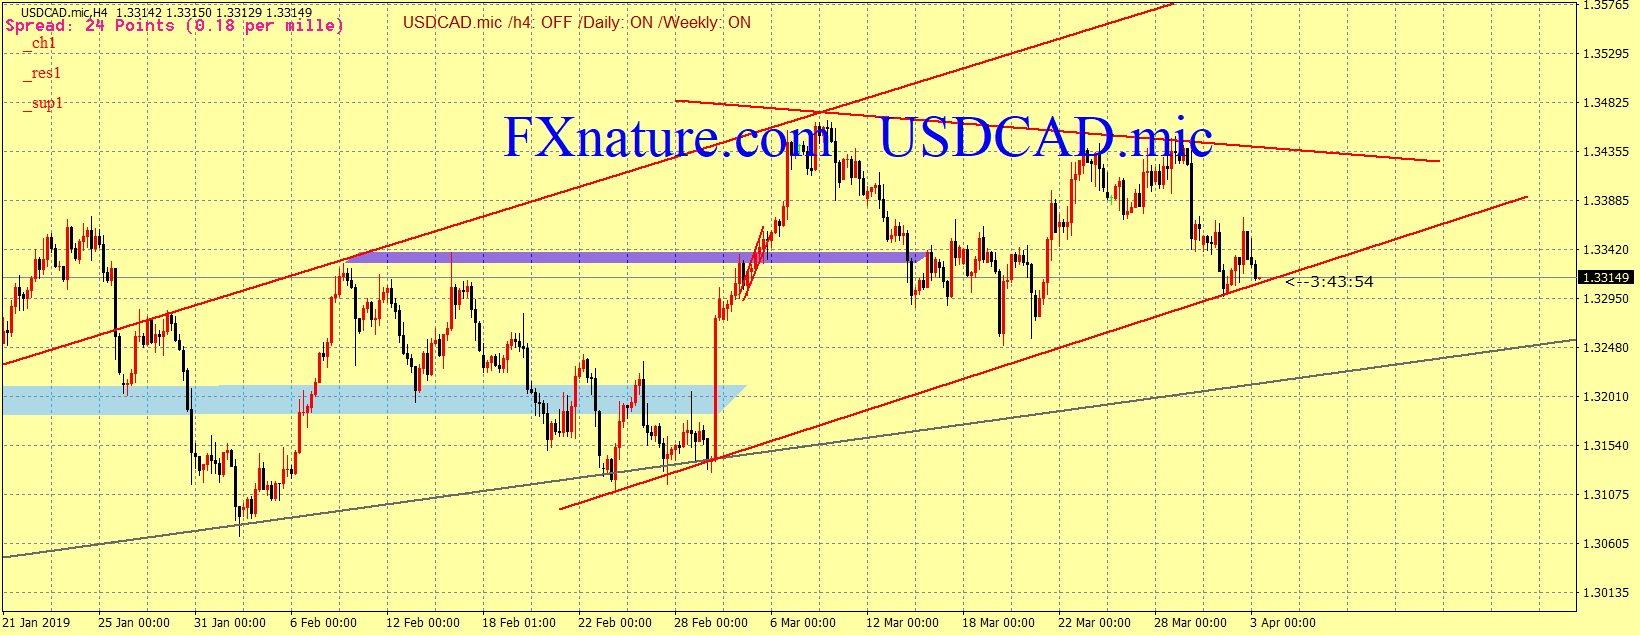 TECHNICAL ANALYSIS OF USDCAD 